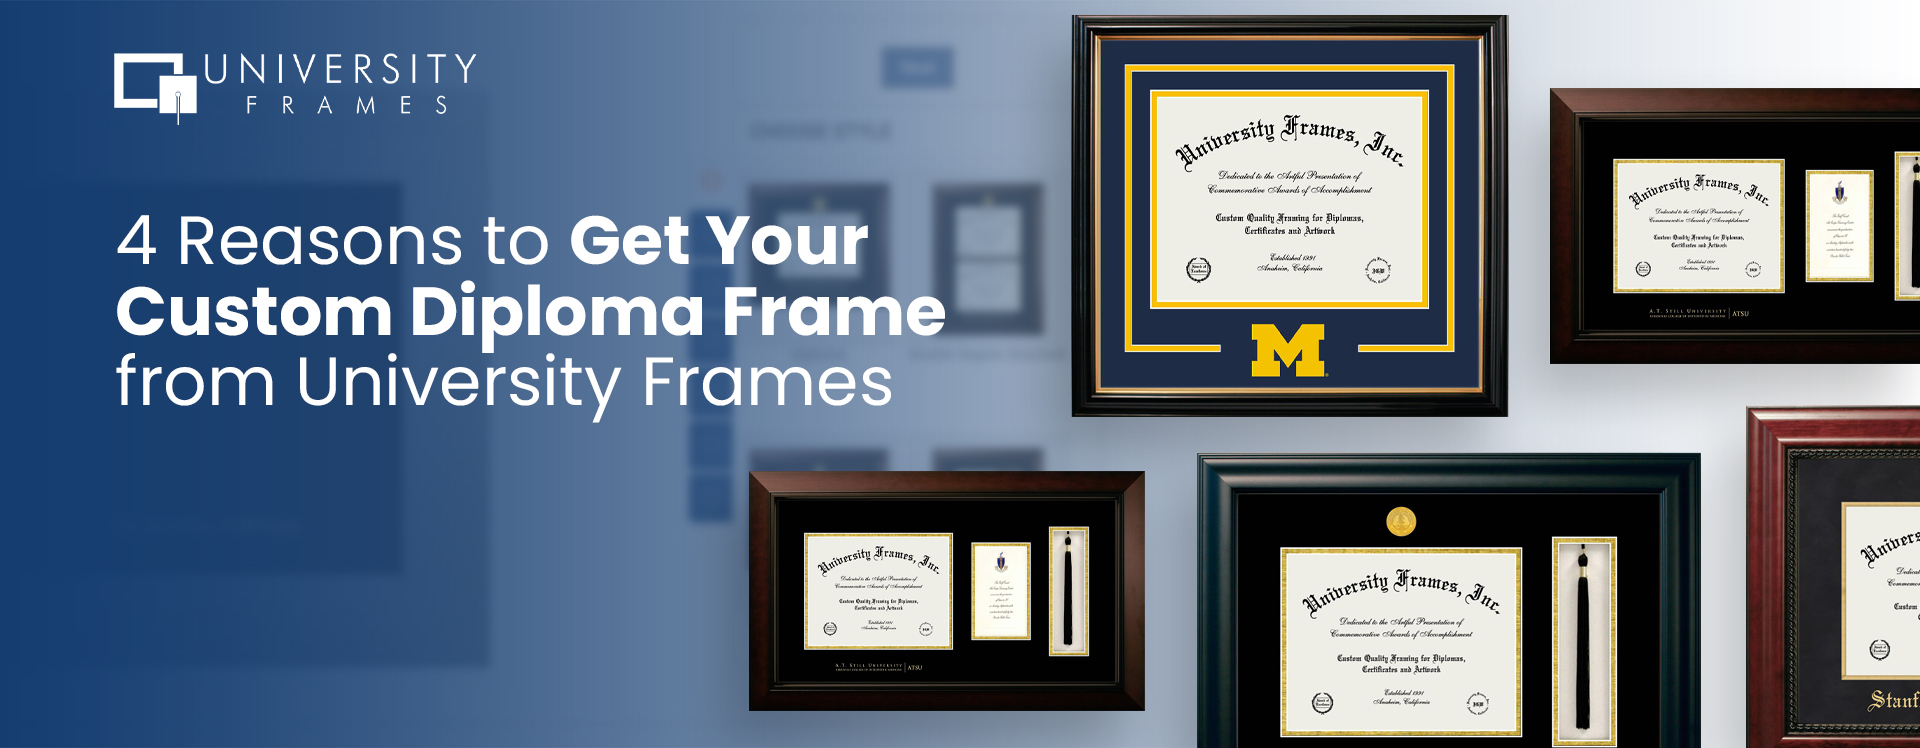 4 Reasons to Get Your Custom Diploma Frame from University Frames 